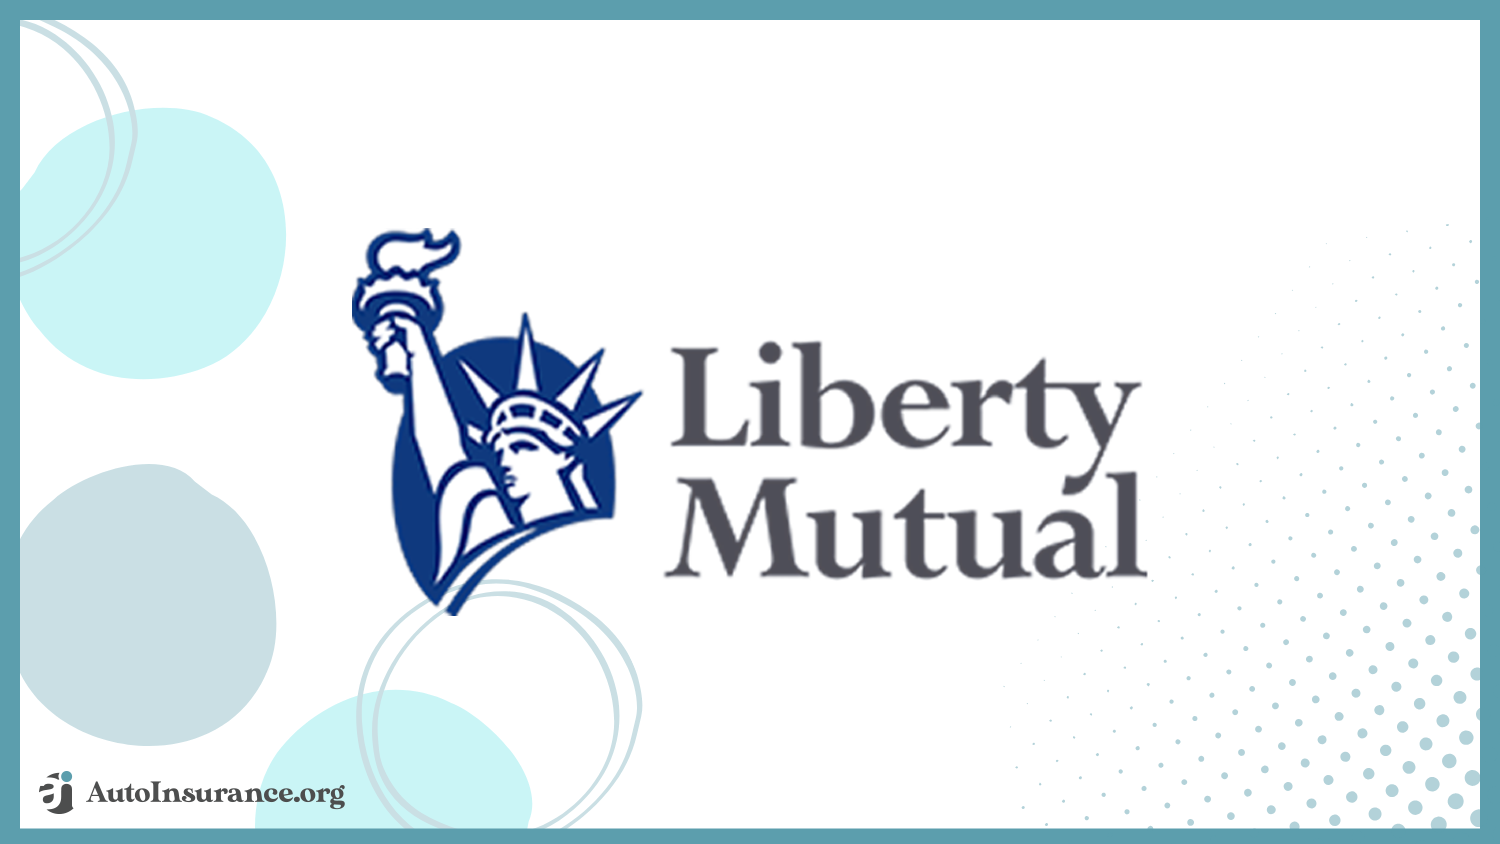 Liberty Mutual best auto insurance companies that offer cash back for safe drivers

